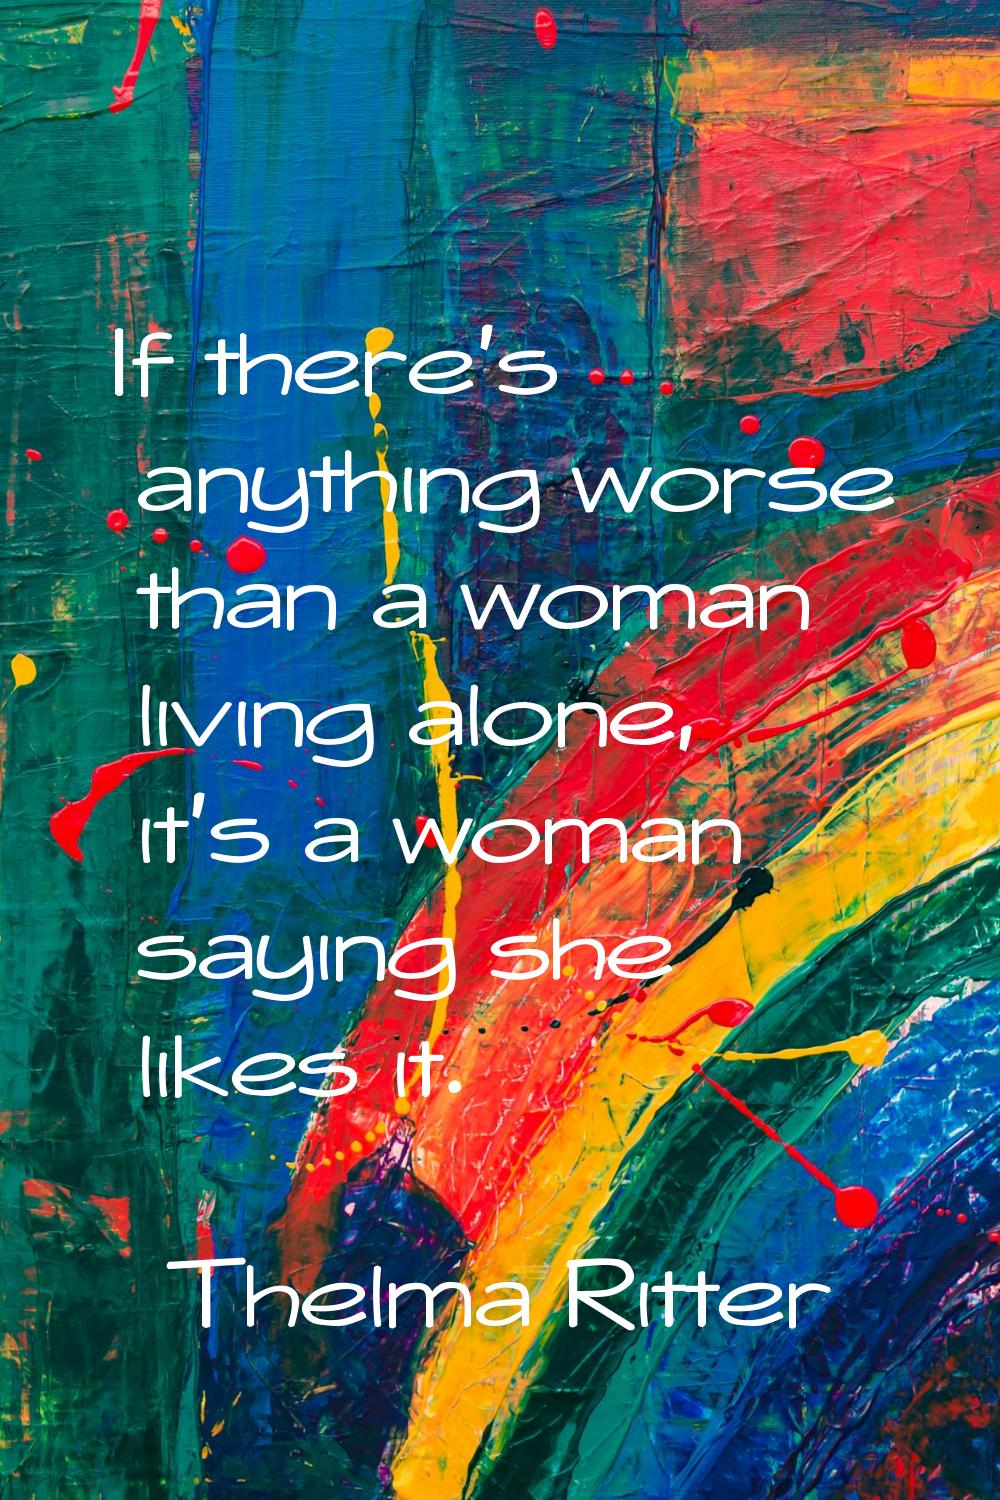 If there's anything worse than a woman living alone, it's a woman saying she likes it.